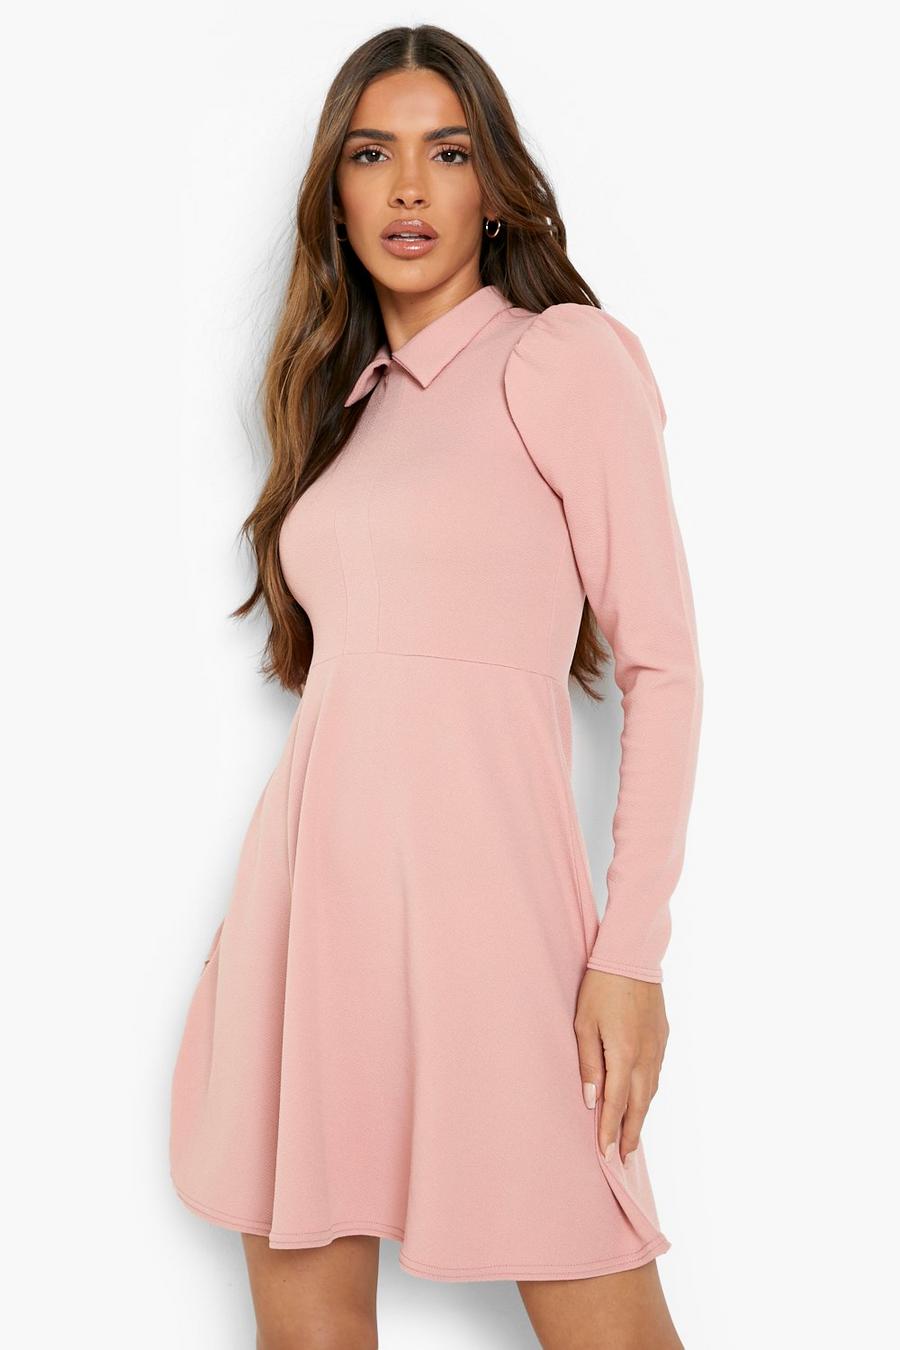 Dusty rose Long Sleeve Collared Skater Dress image number 1